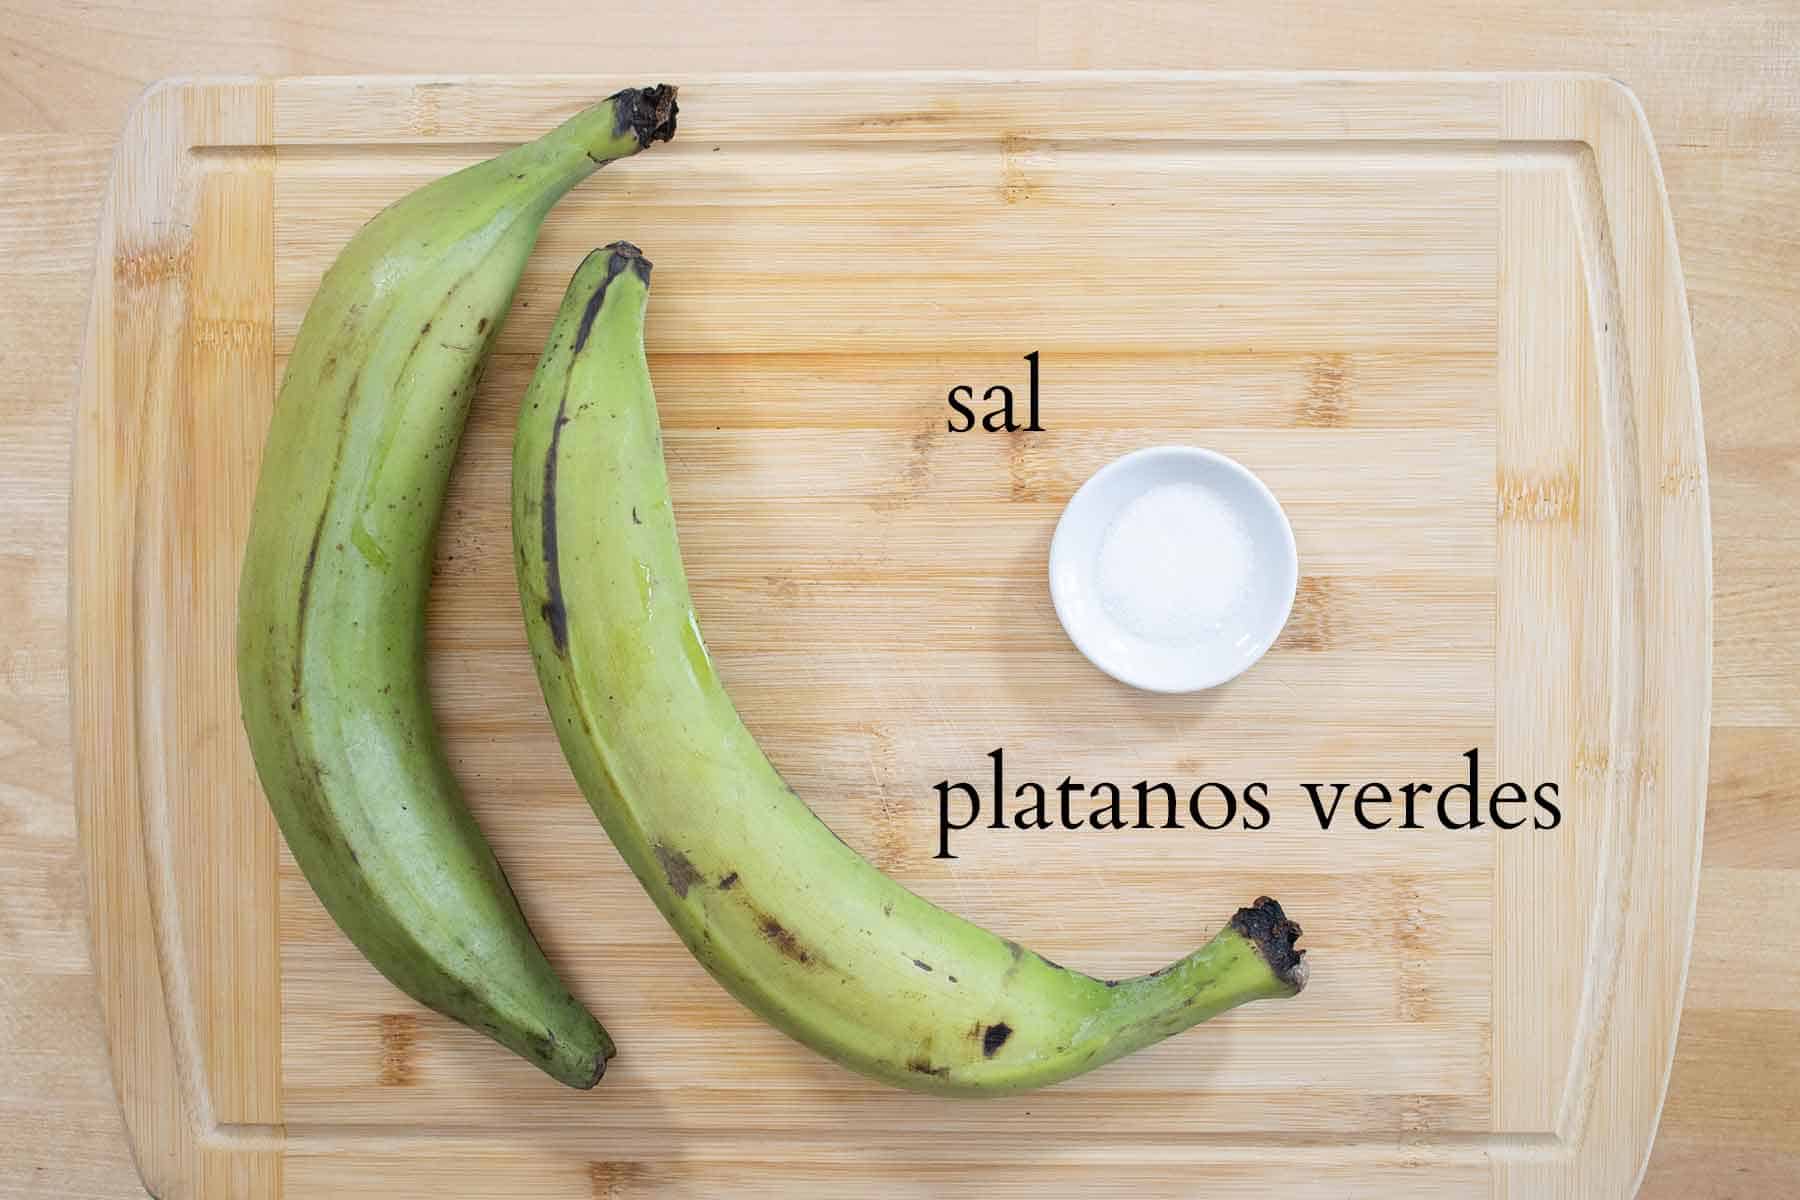 all the ingredients needed to make platanutres or plantain chips.